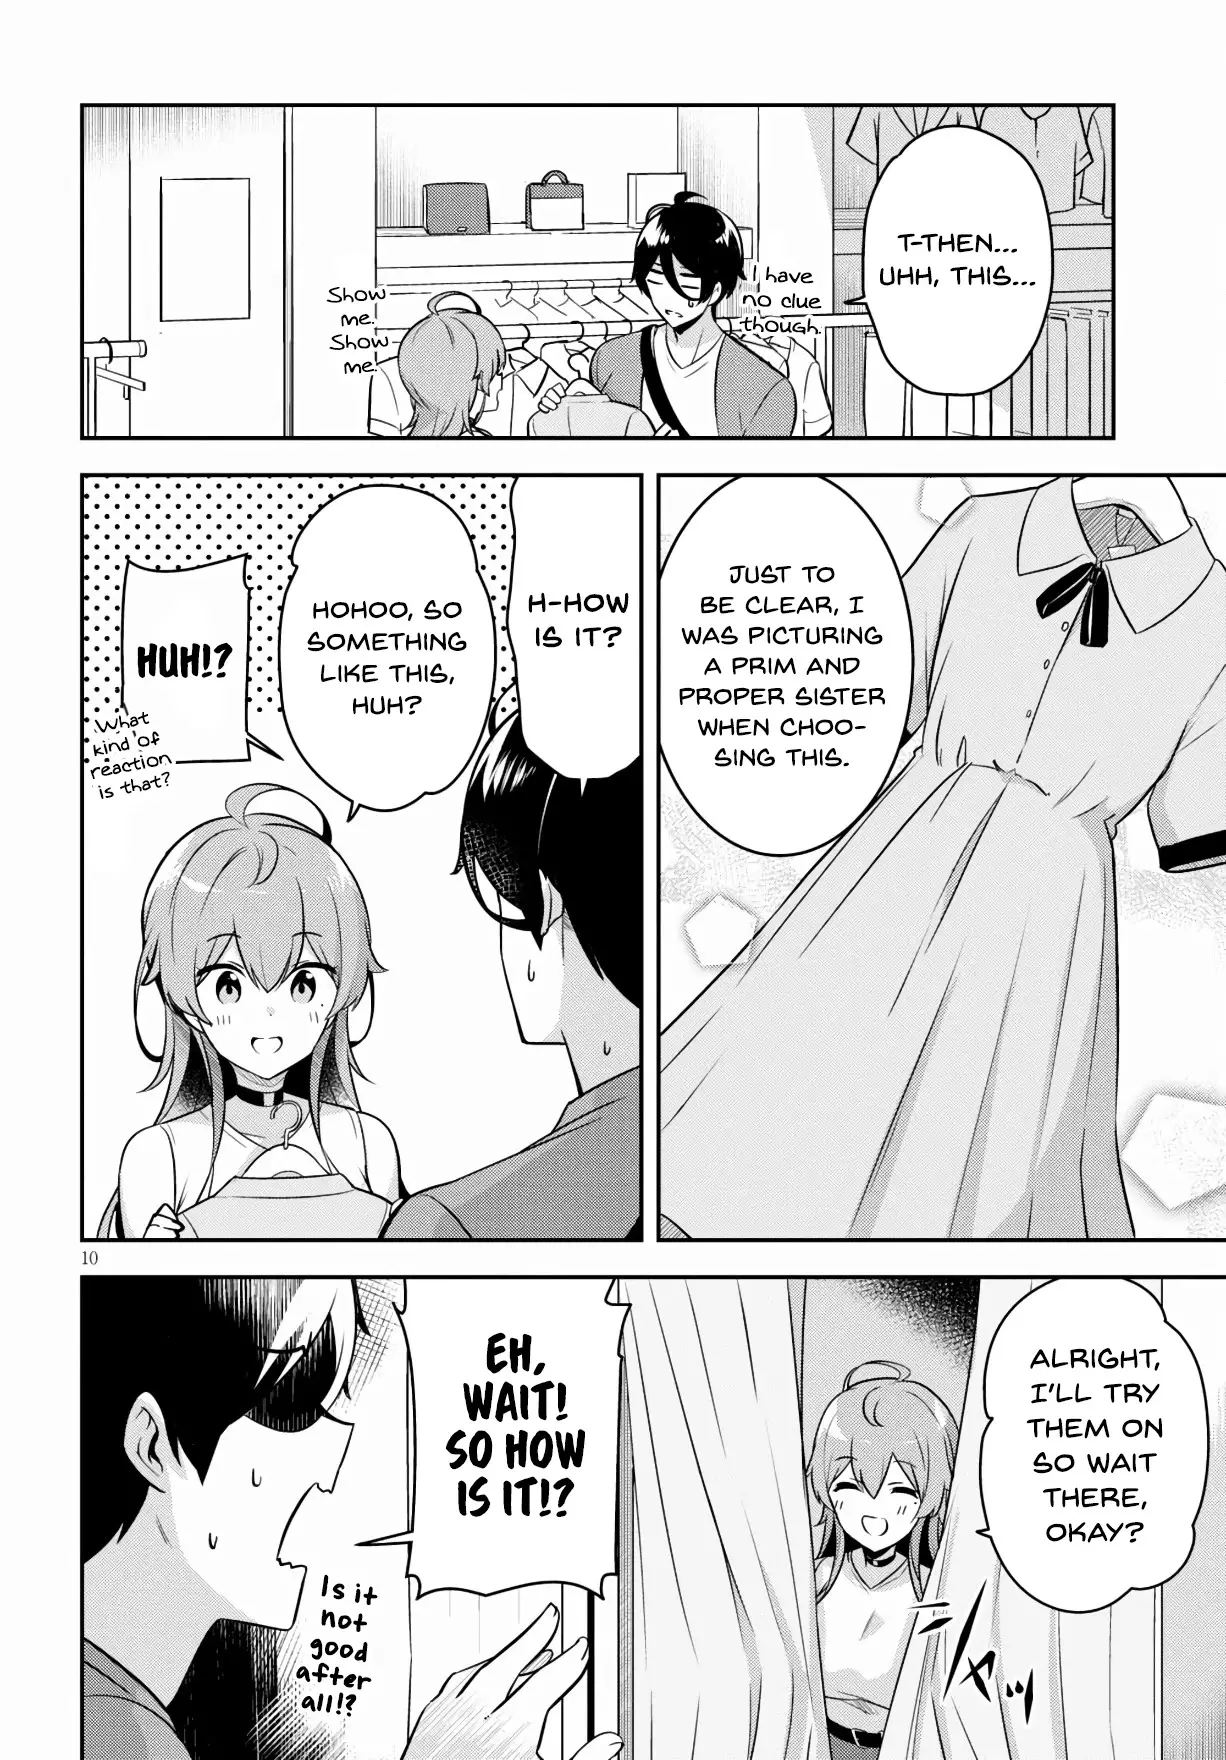 I Suddenly Have An "older" Sister! - 3 page 11-33866ac5